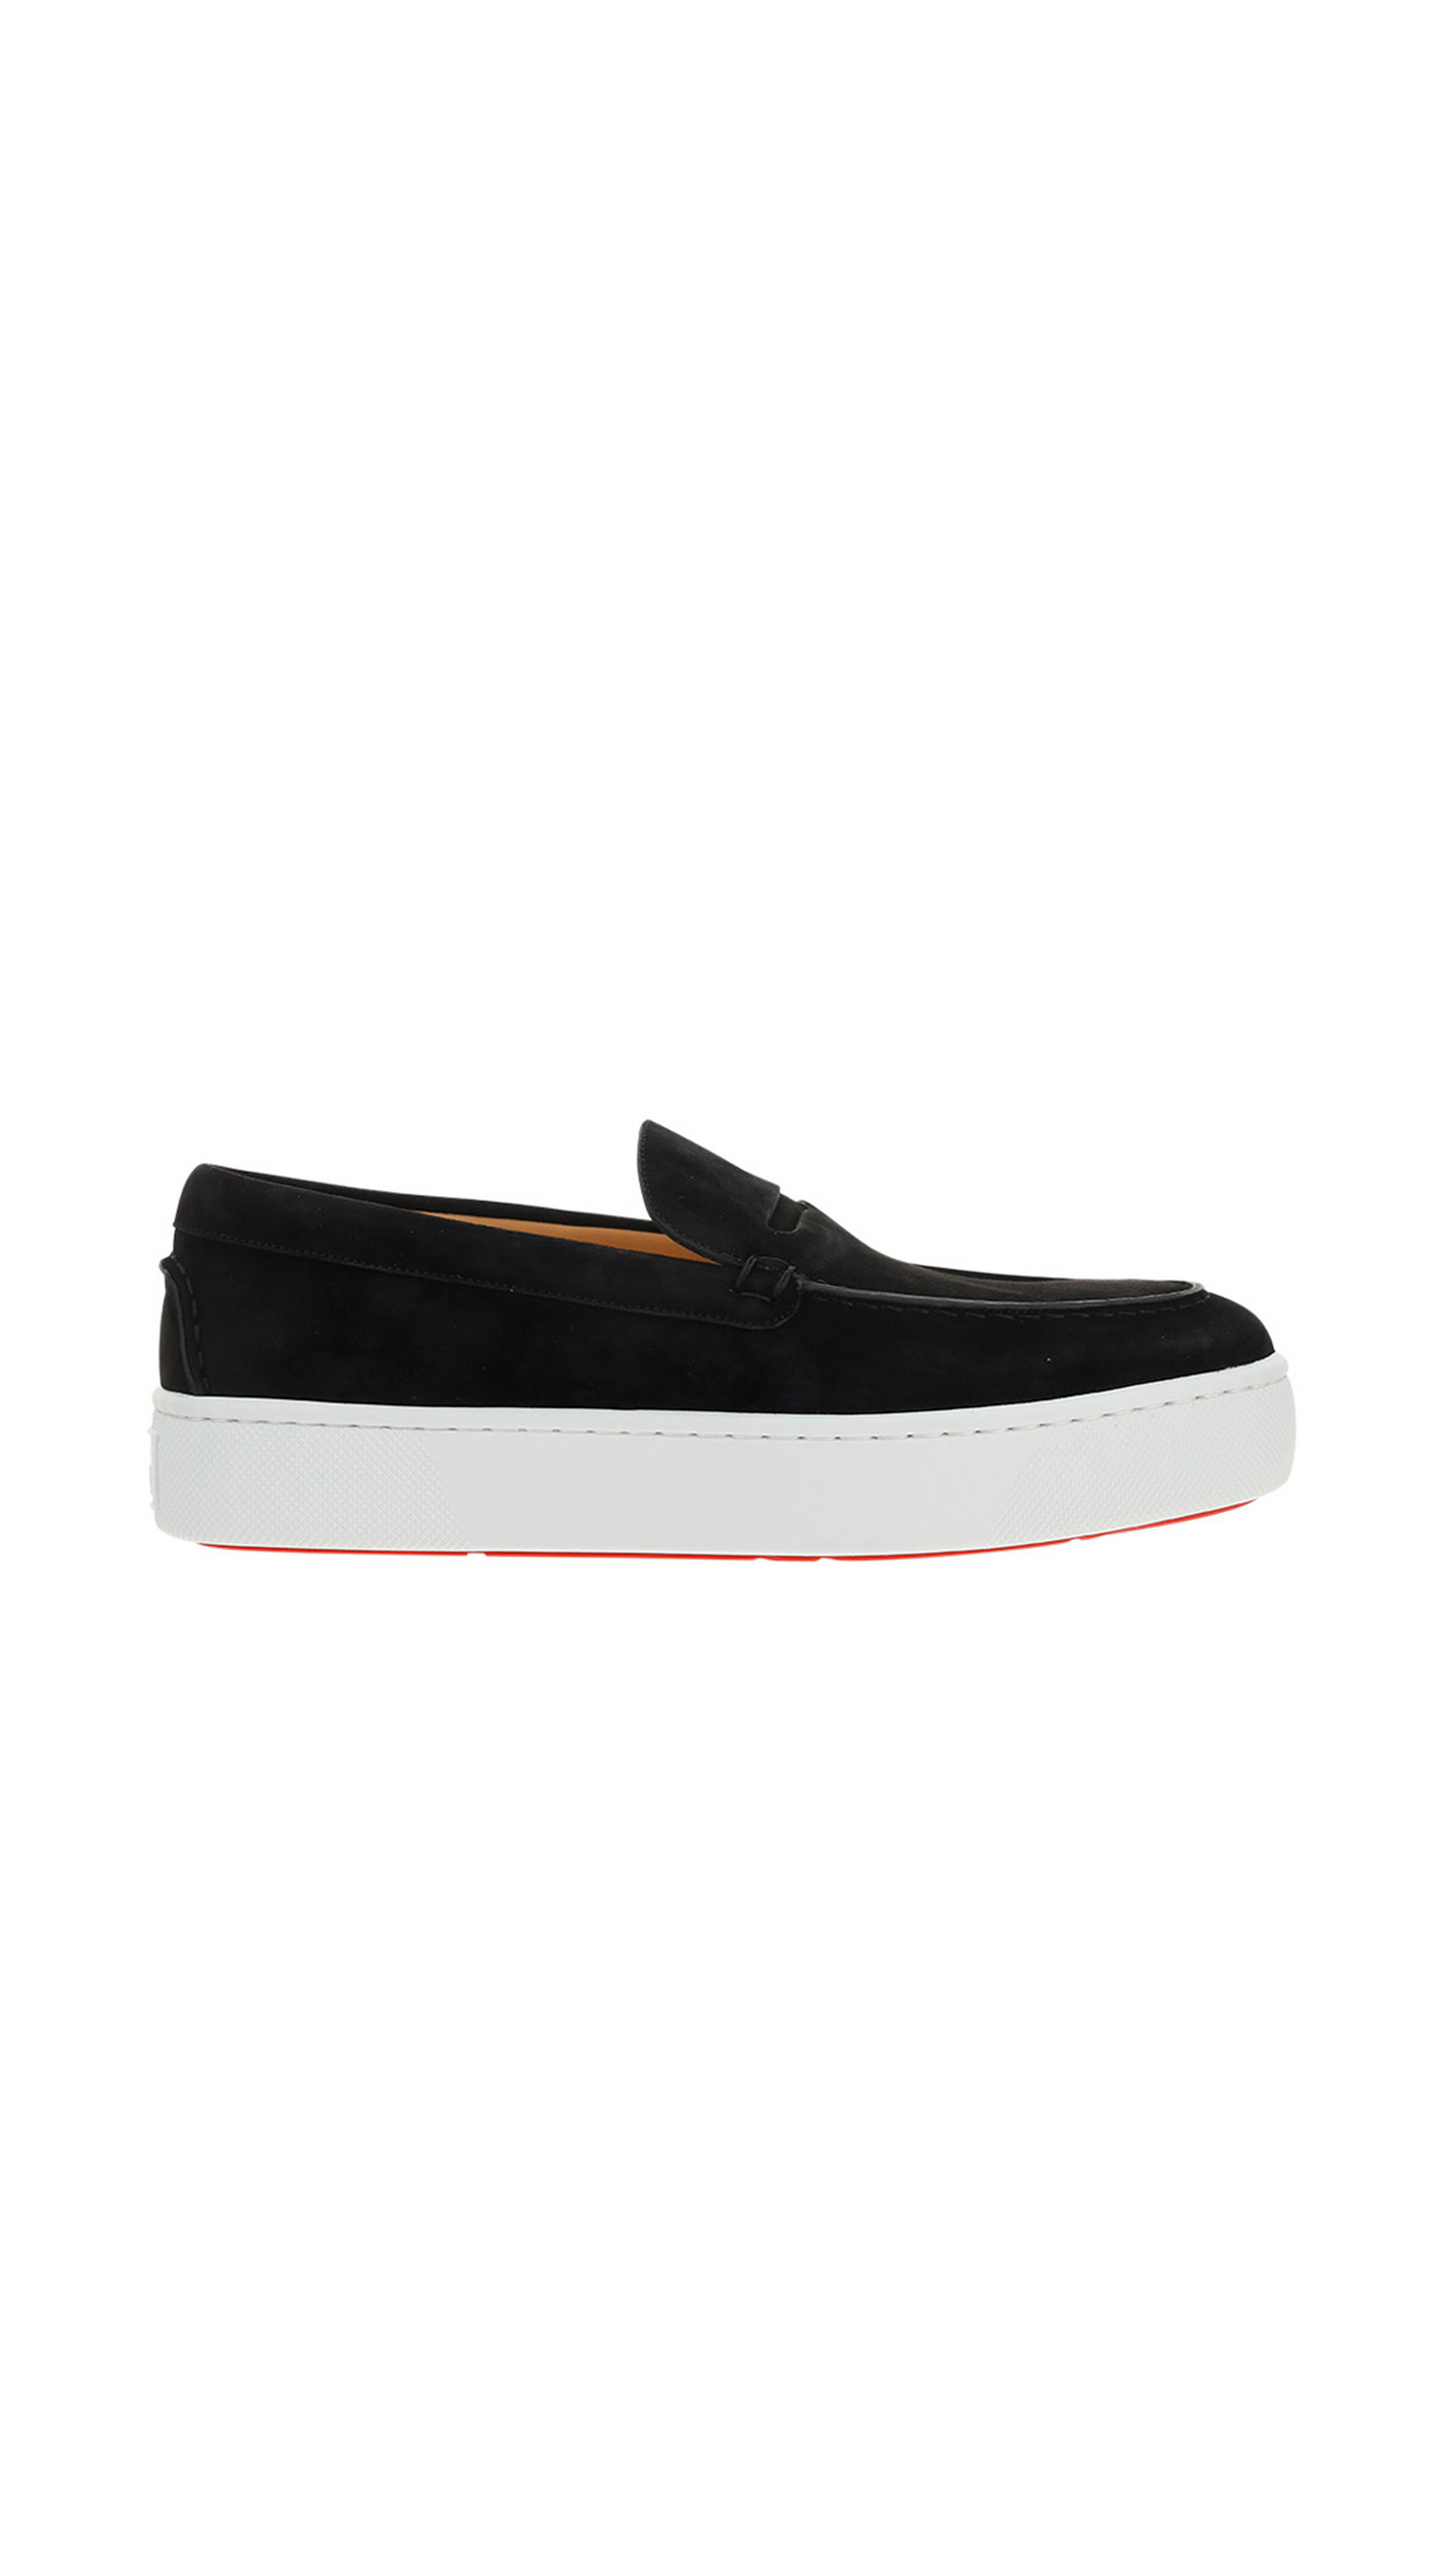 Paqueboat Loafers - Black